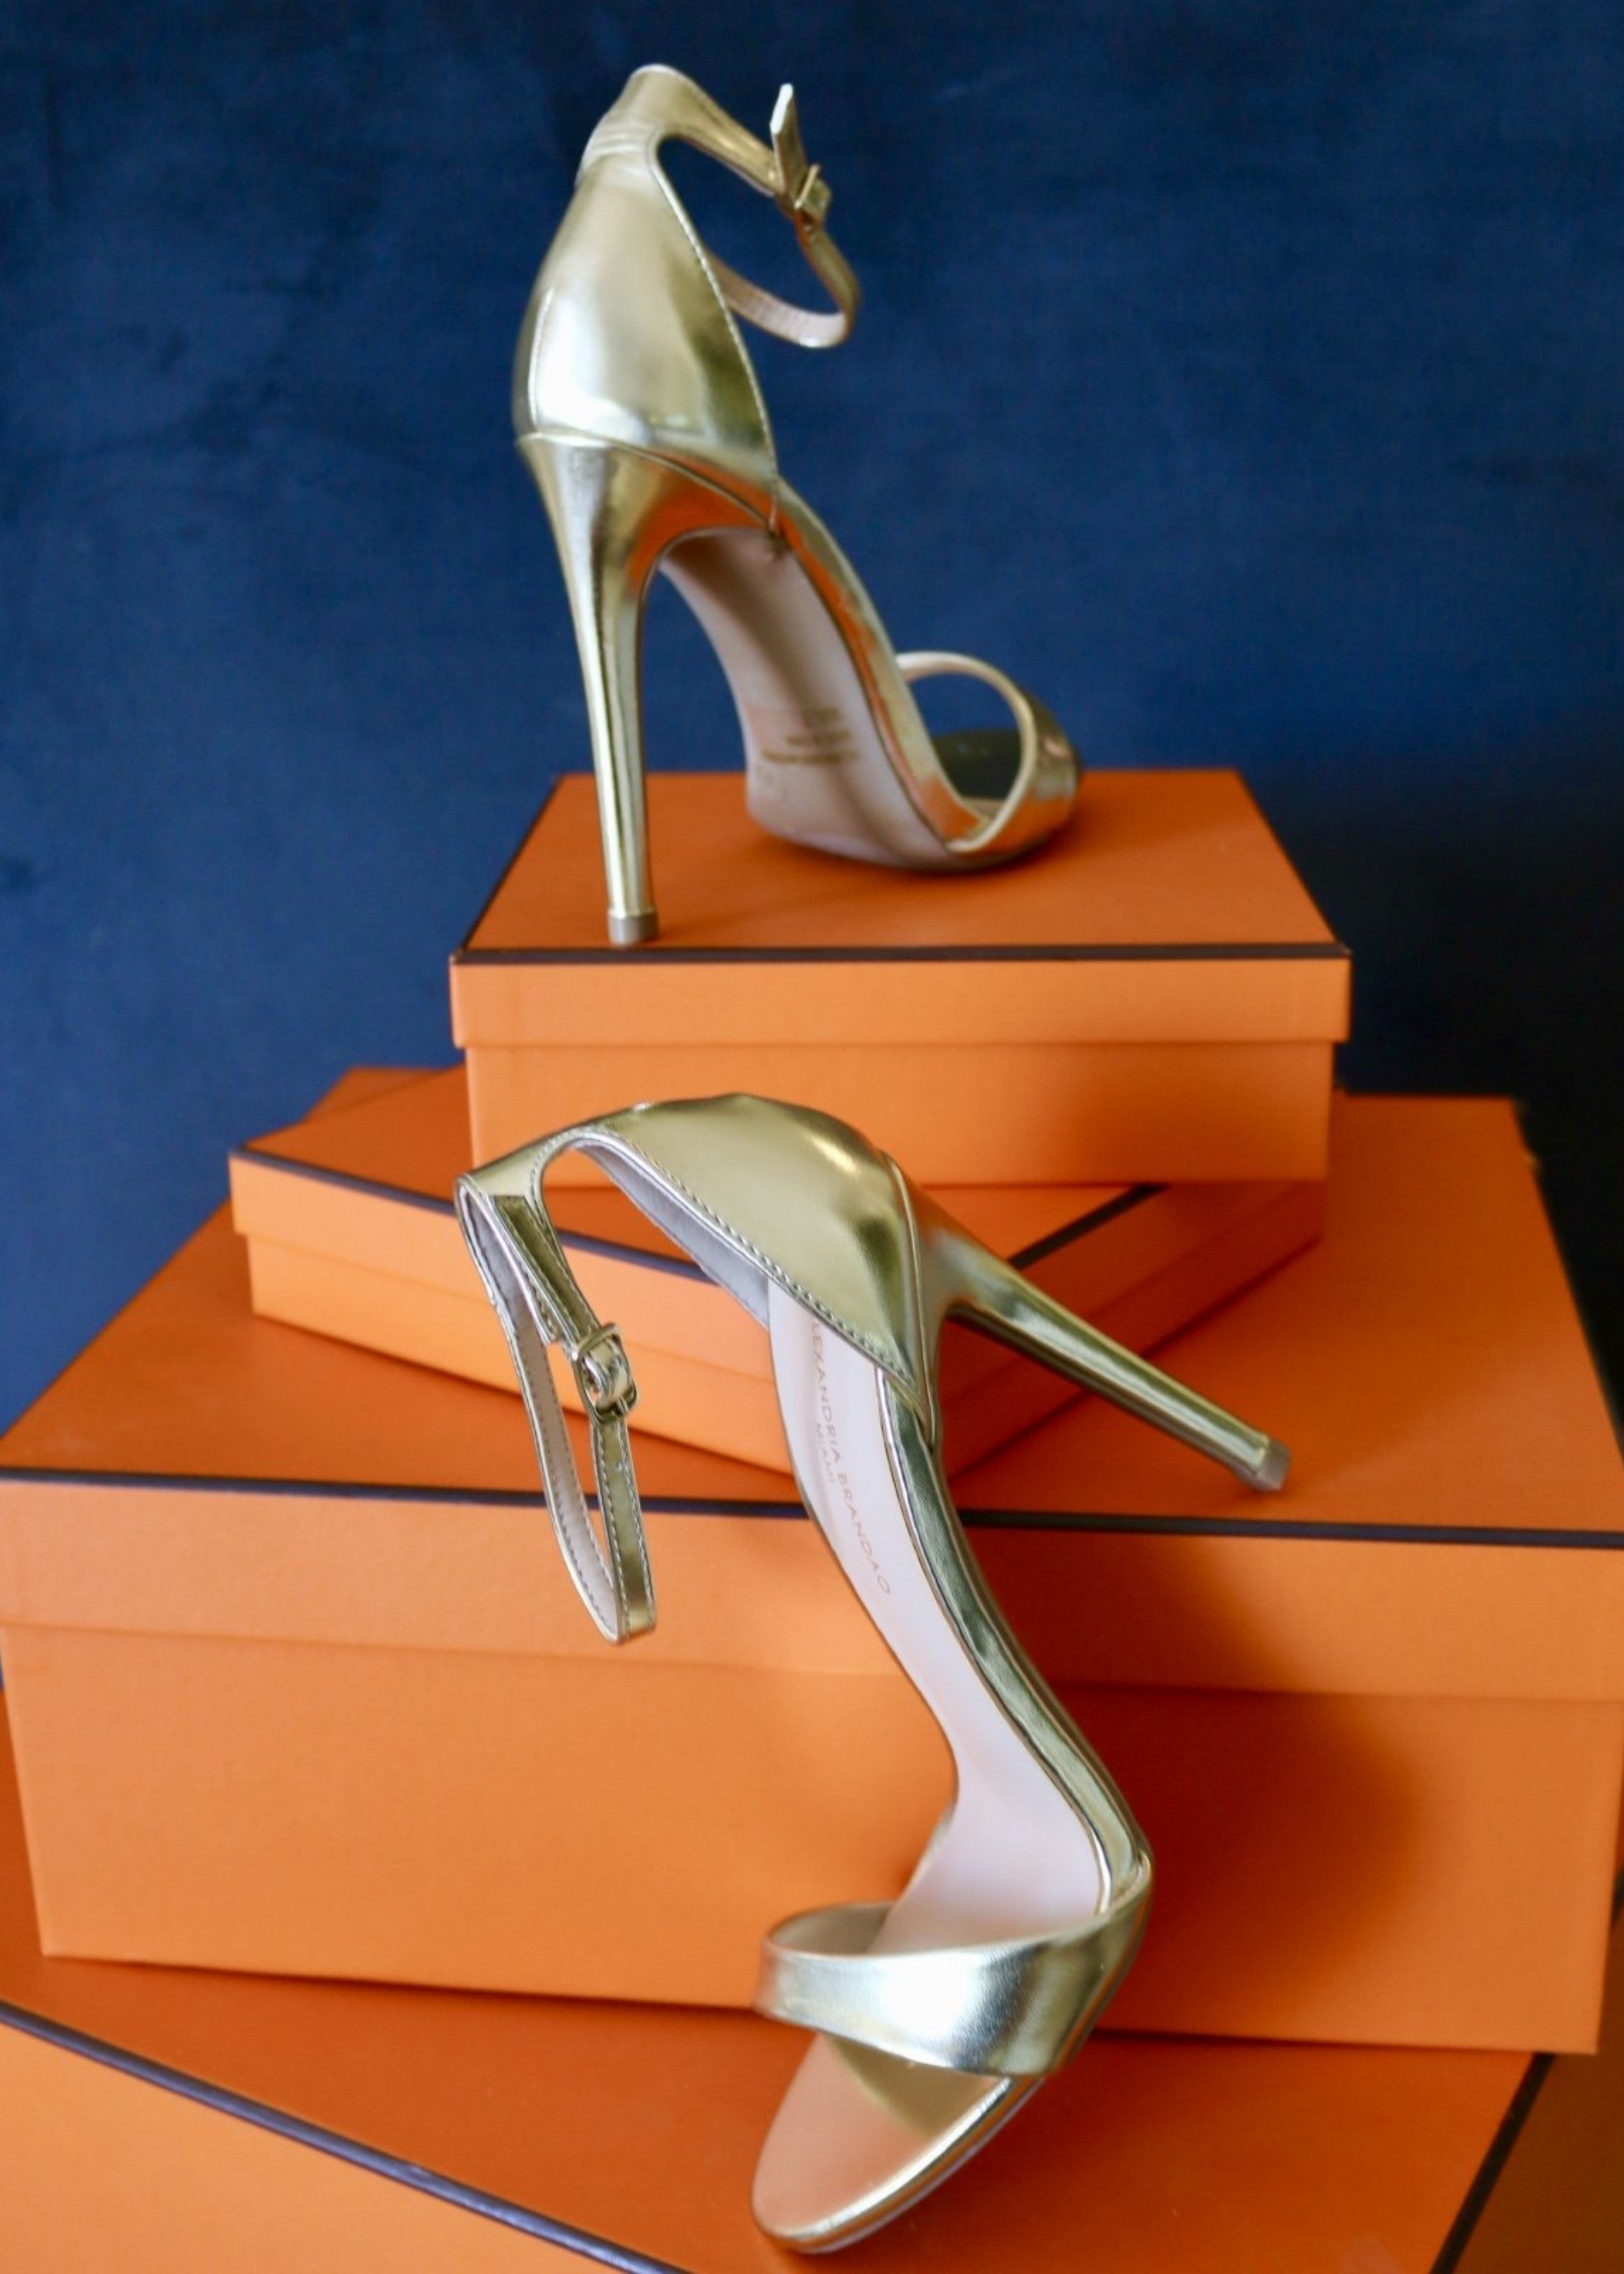 ELEGANT MODERN PAGEANT/PARTY HEELS 4 INCHES NUDE COLOUR | Shopee Philippines